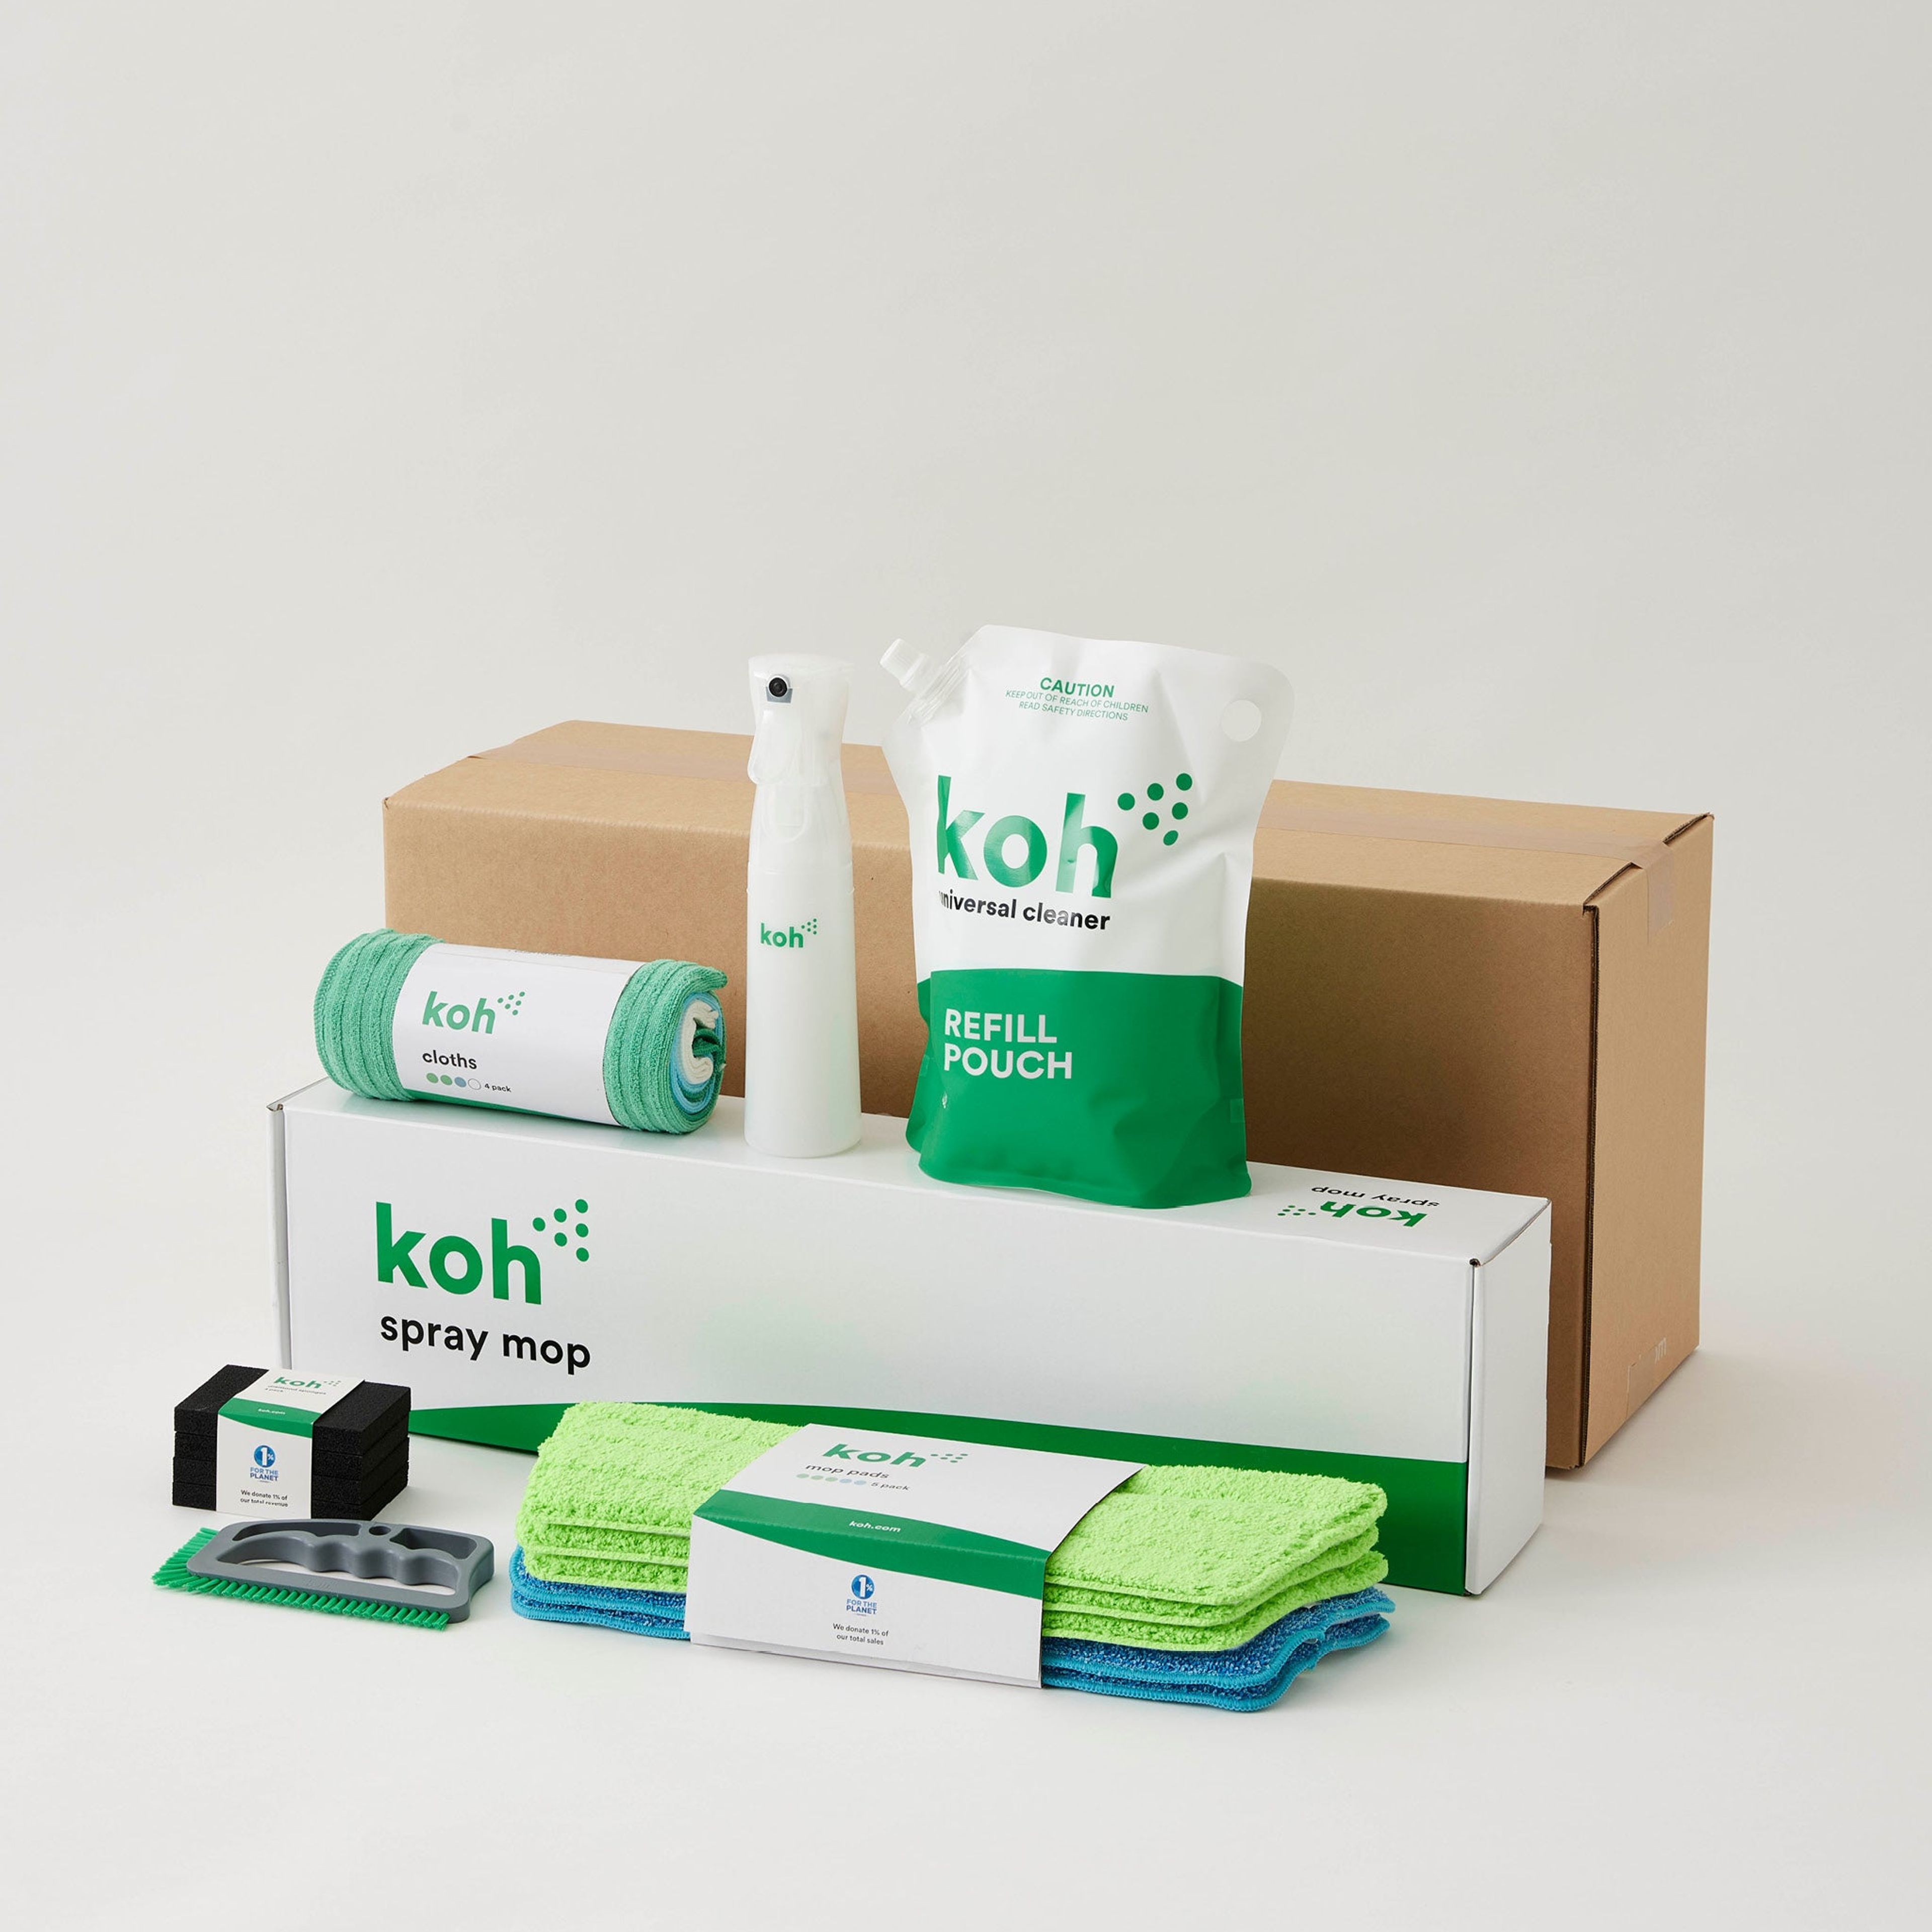 www.koh.com/products/surface-spray-mop-starter-kit